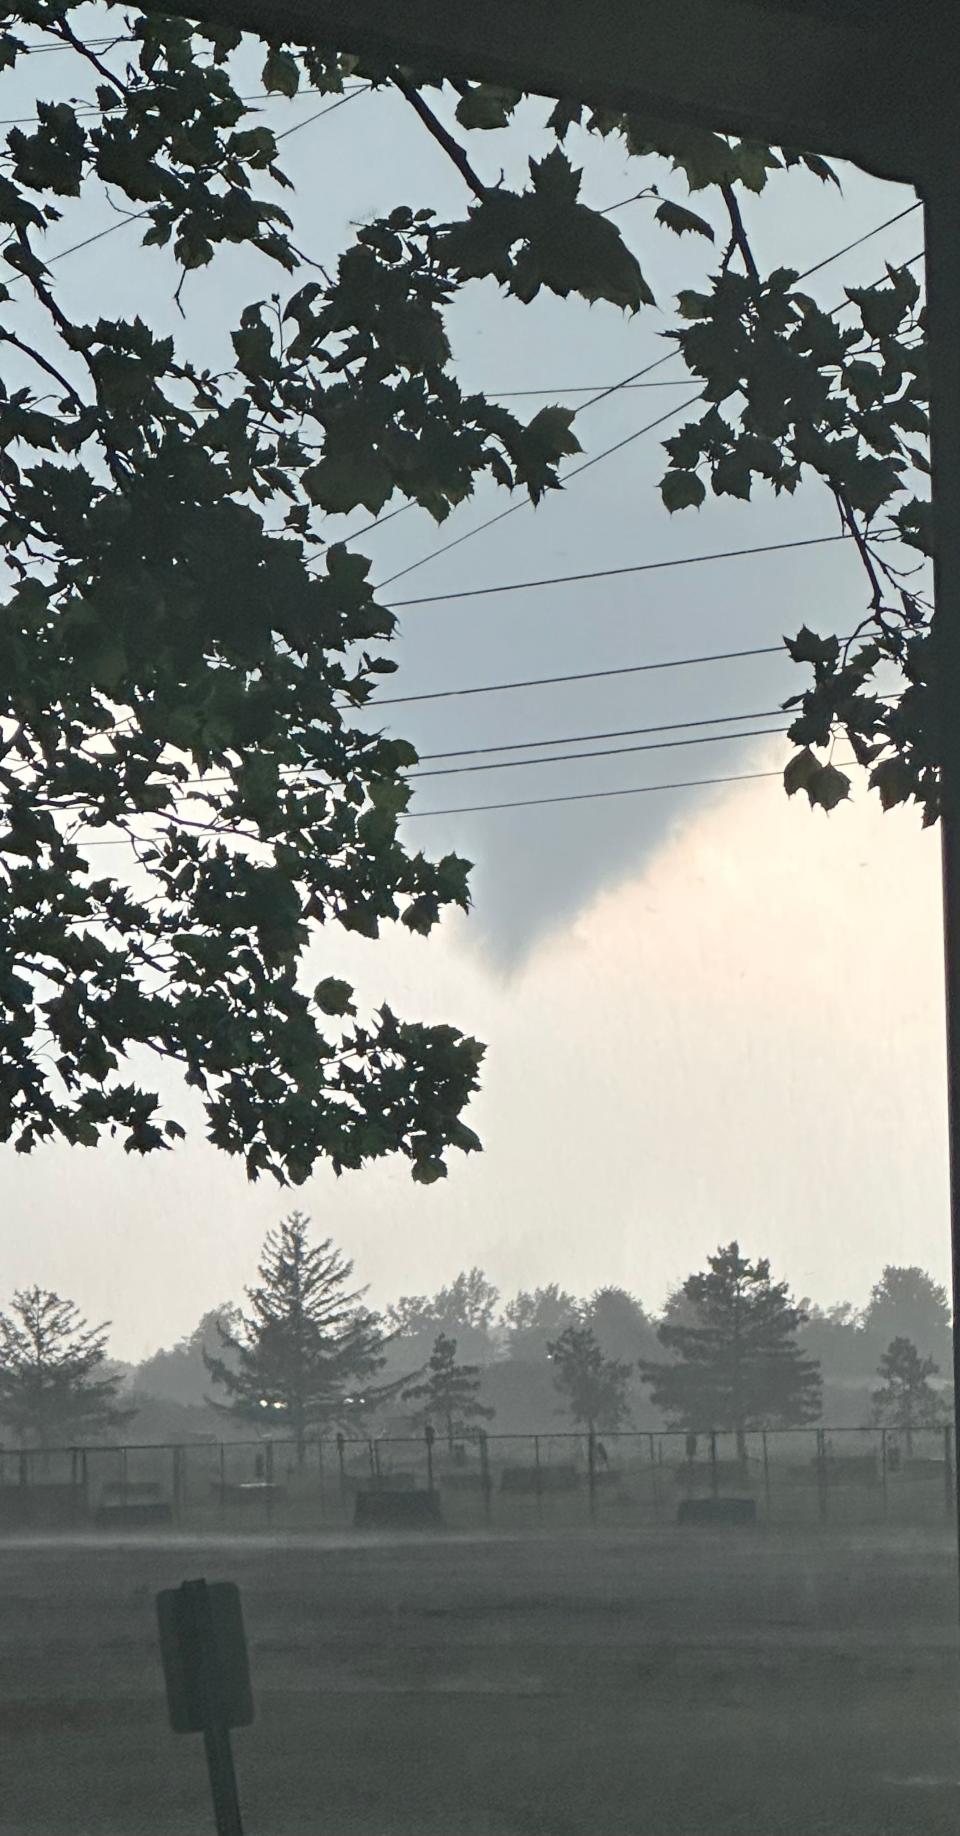 This funnel cloud was photographed shortly before touching down near the Ottawa County Fairgrounds on Thursday night [June 15].